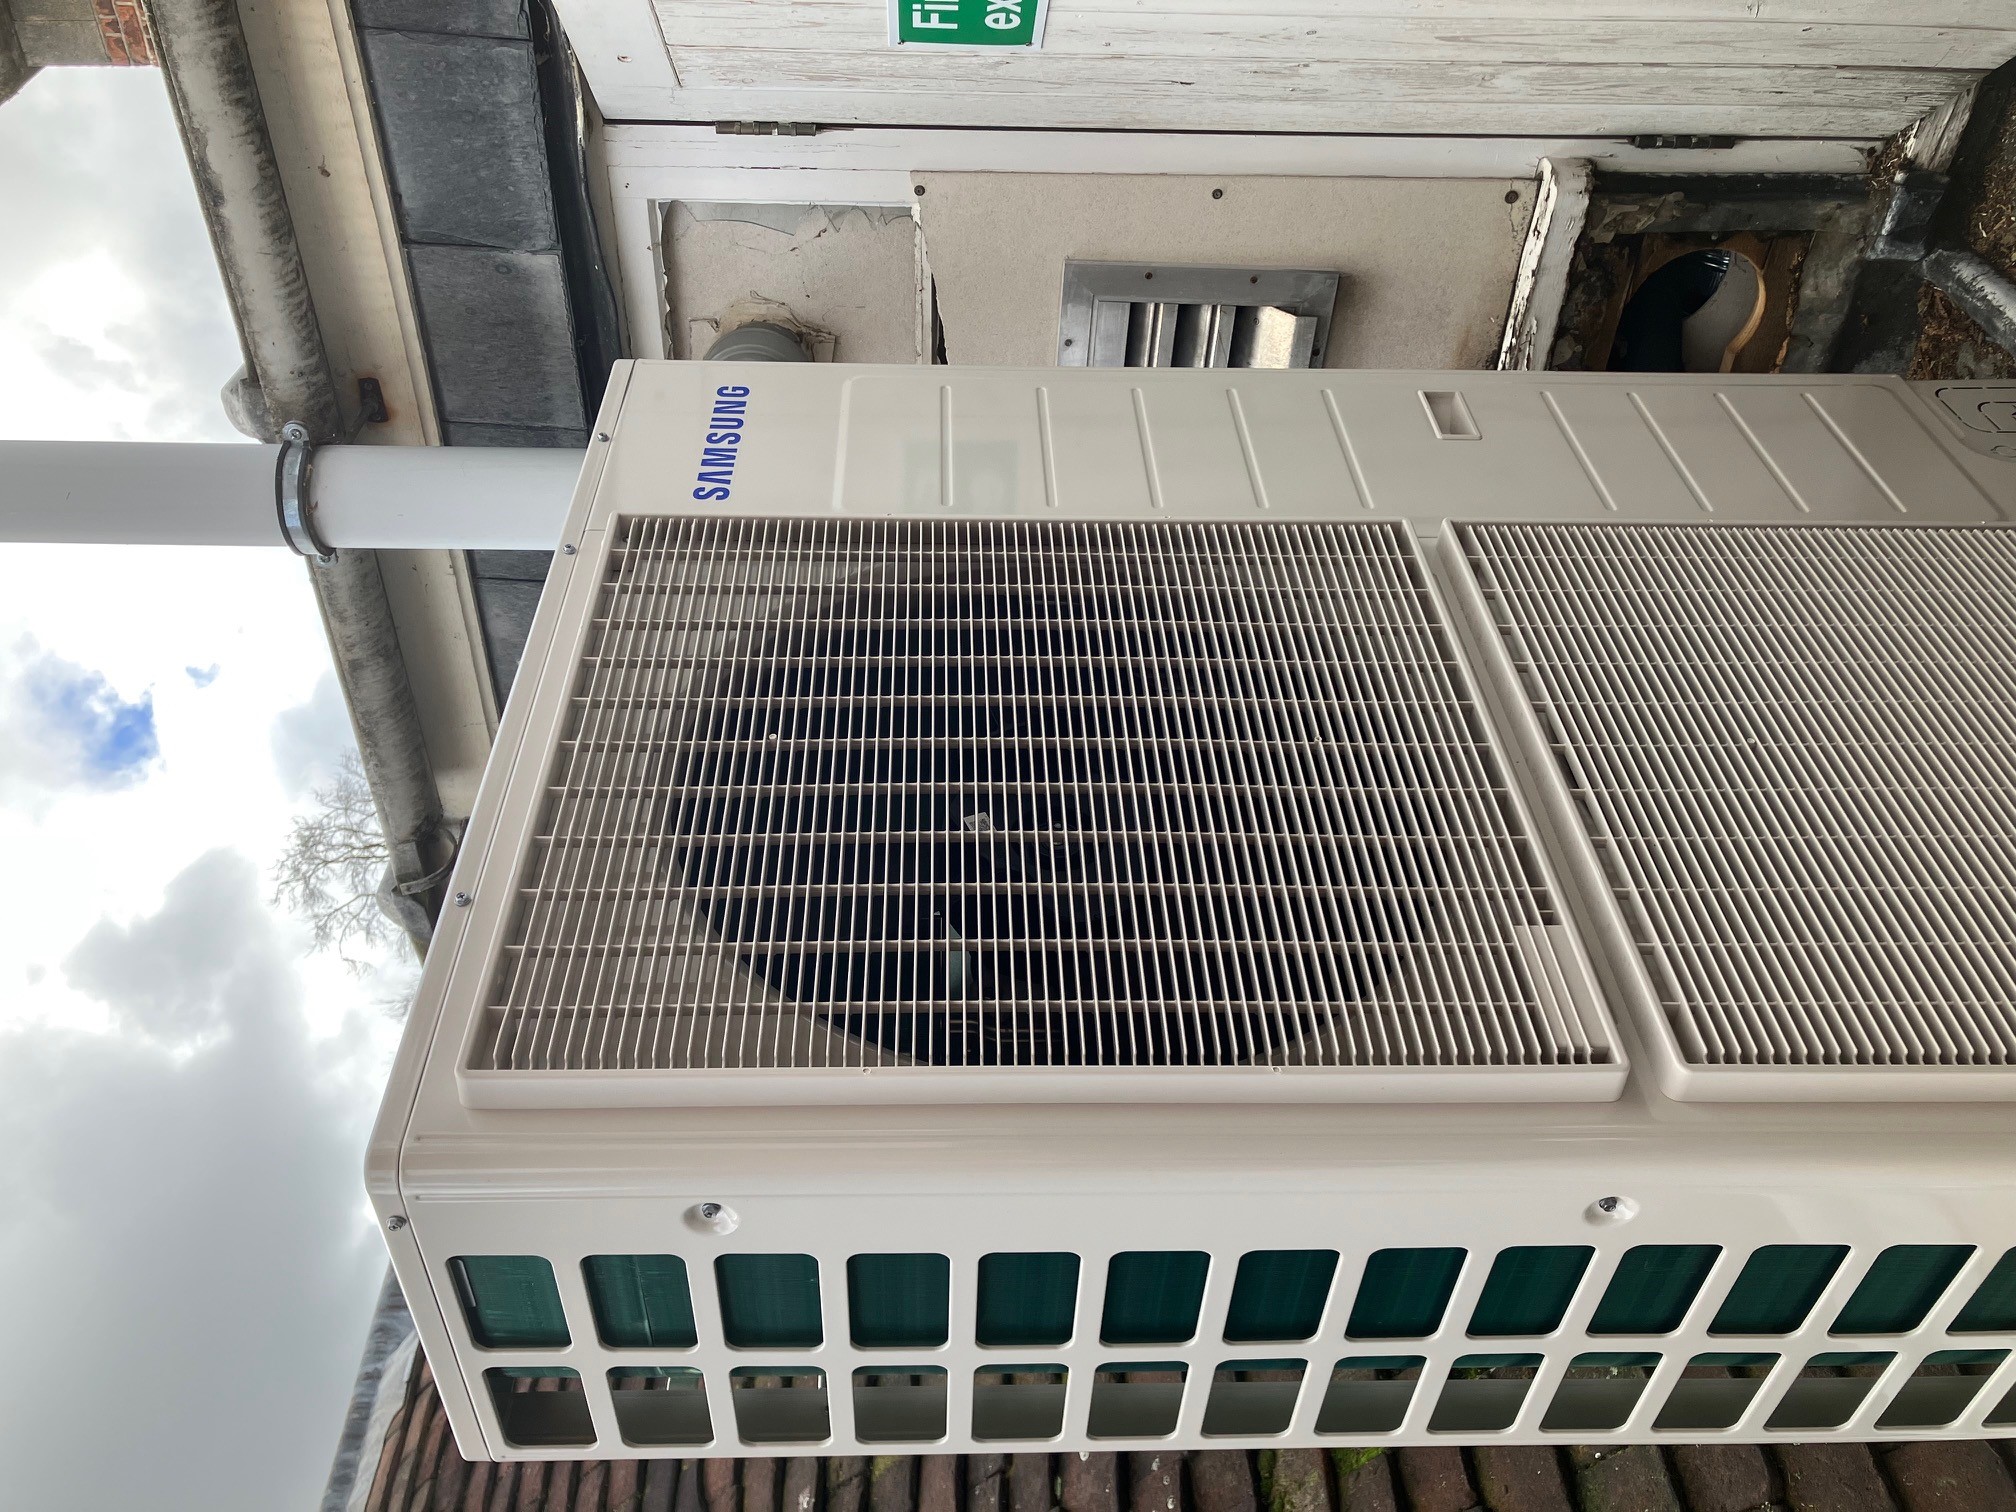 Photo of a heat pump on top of a building